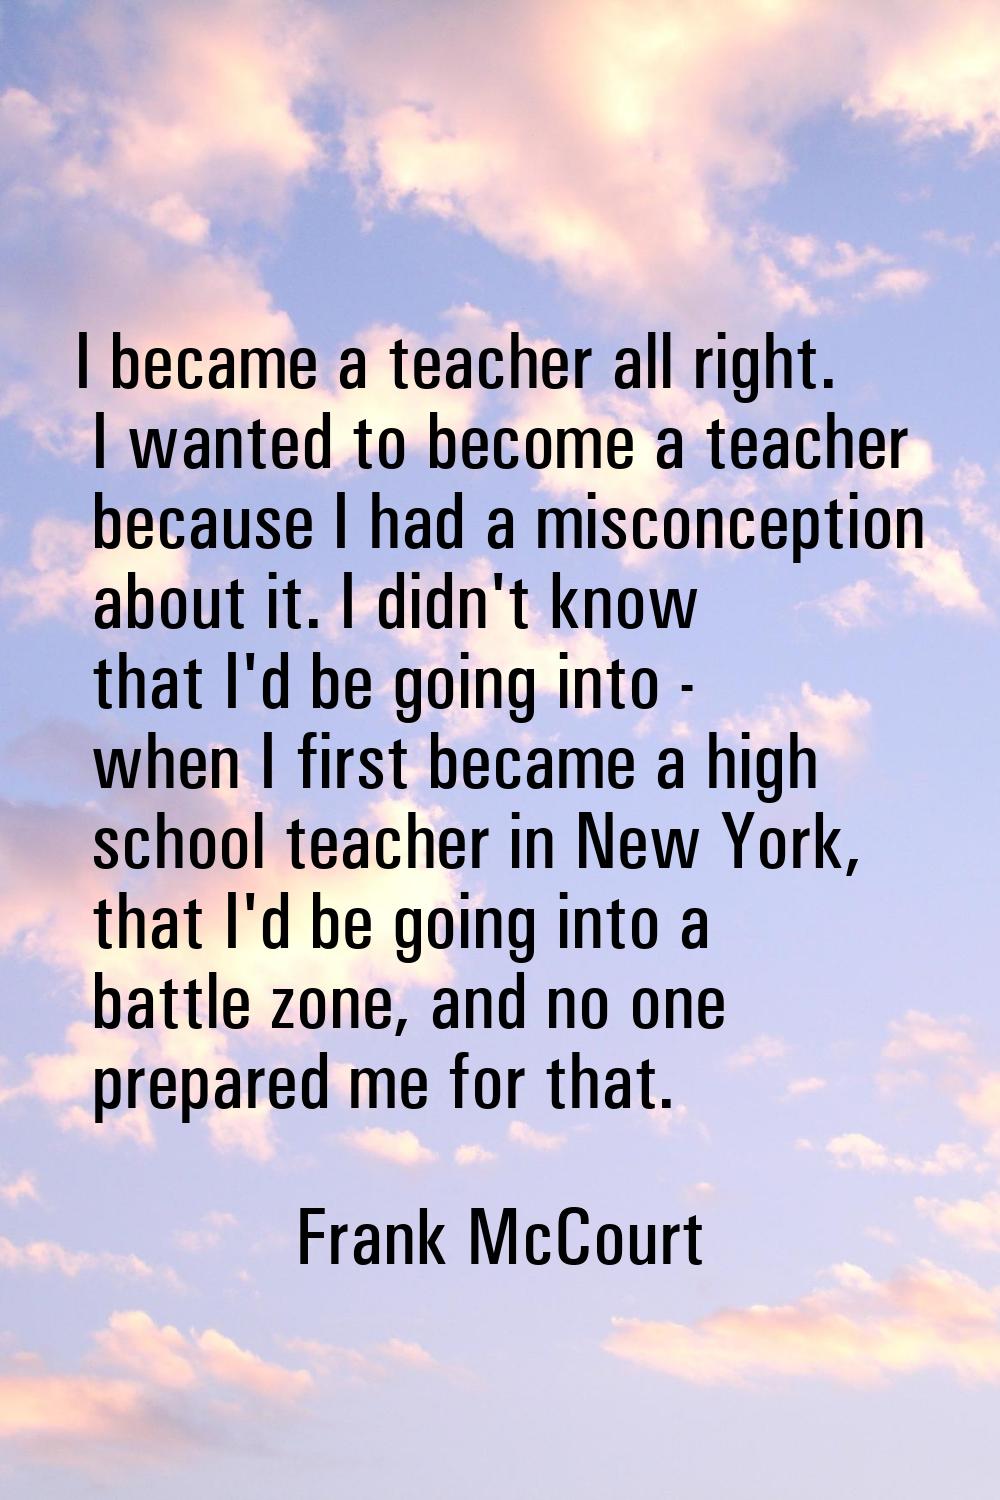 I became a teacher all right. I wanted to become a teacher because I had a misconception about it. 